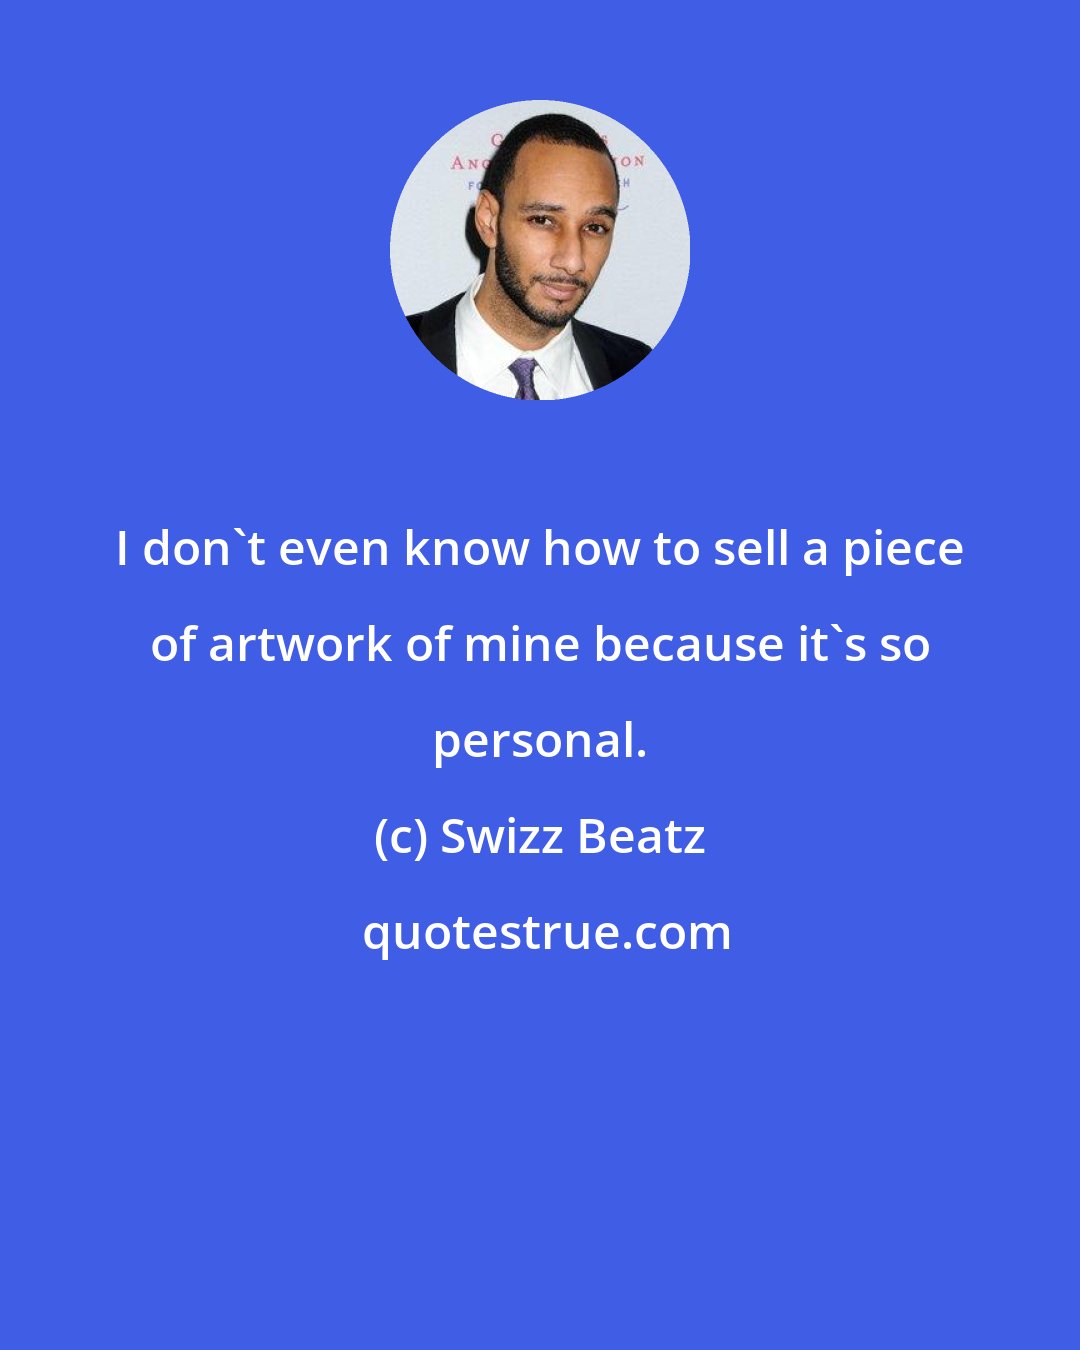 Swizz Beatz: I don't even know how to sell a piece of artwork of mine because it's so personal.